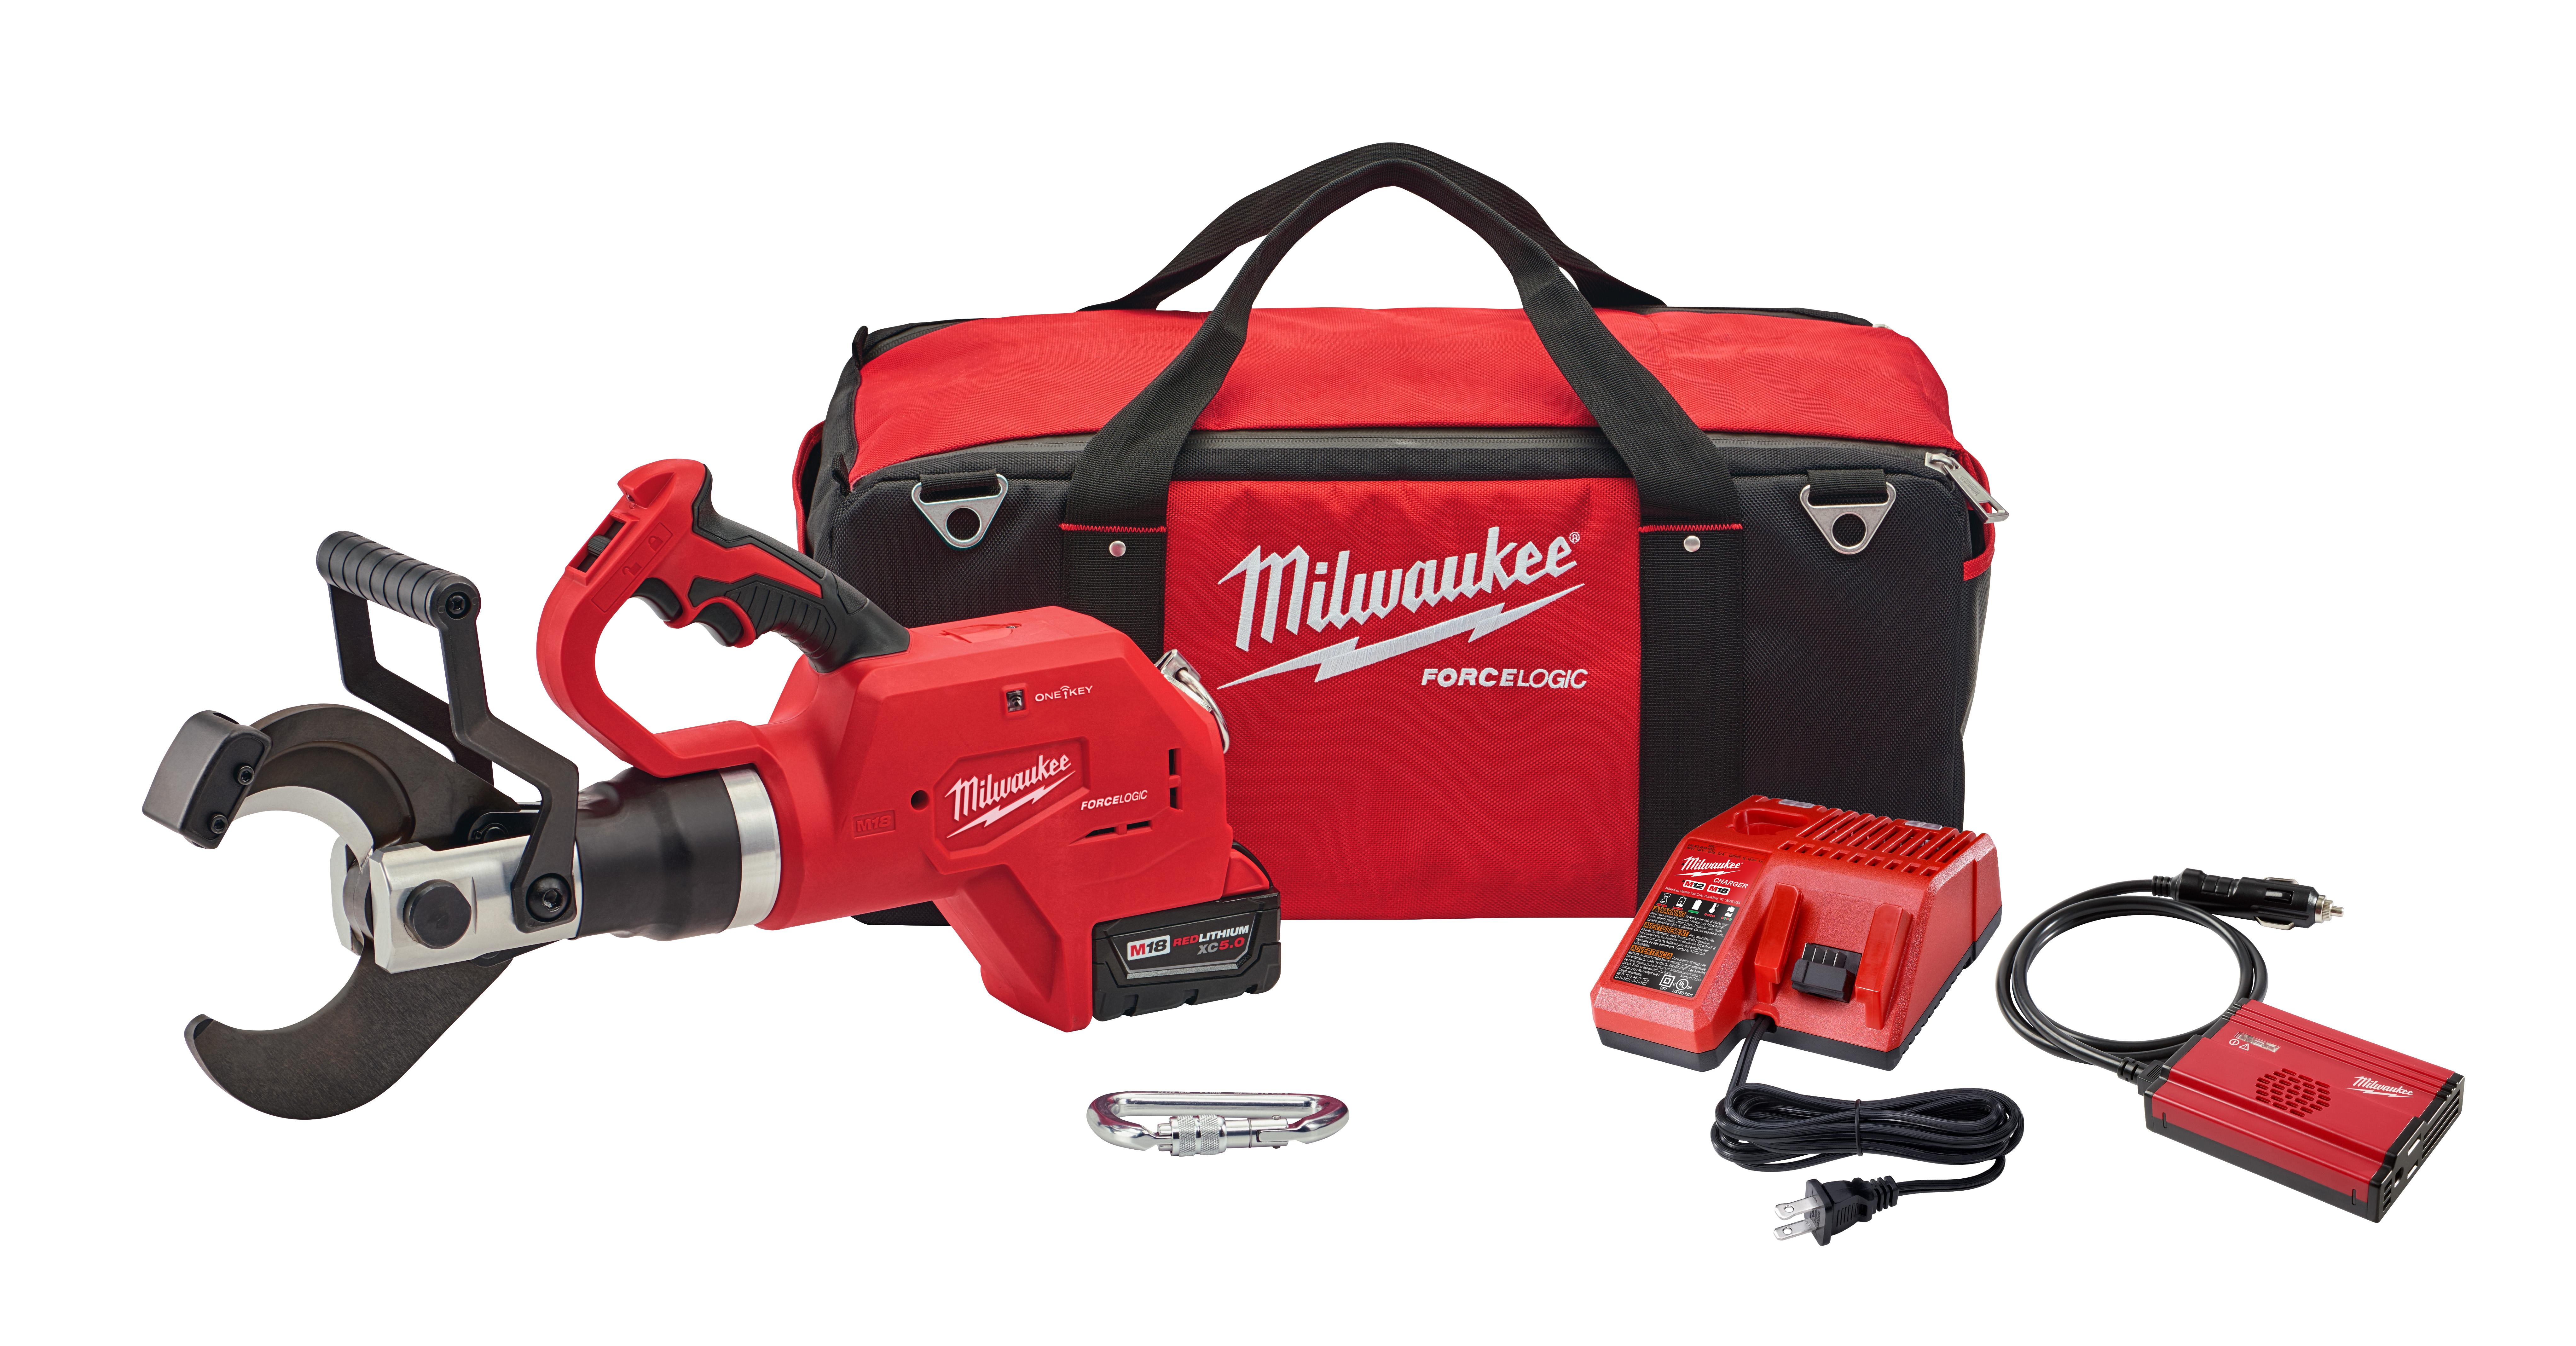 Milwaukee® M12™ REDLITHIUM™ 2472-21XC Cordless Cable Cutter Kit, 600 kcmil Copper, 750 kcmil Aluminum, 1-3/16 in Communication Cable Cutting, 12 VDC, 3 Ah Lithium-Ion Battery